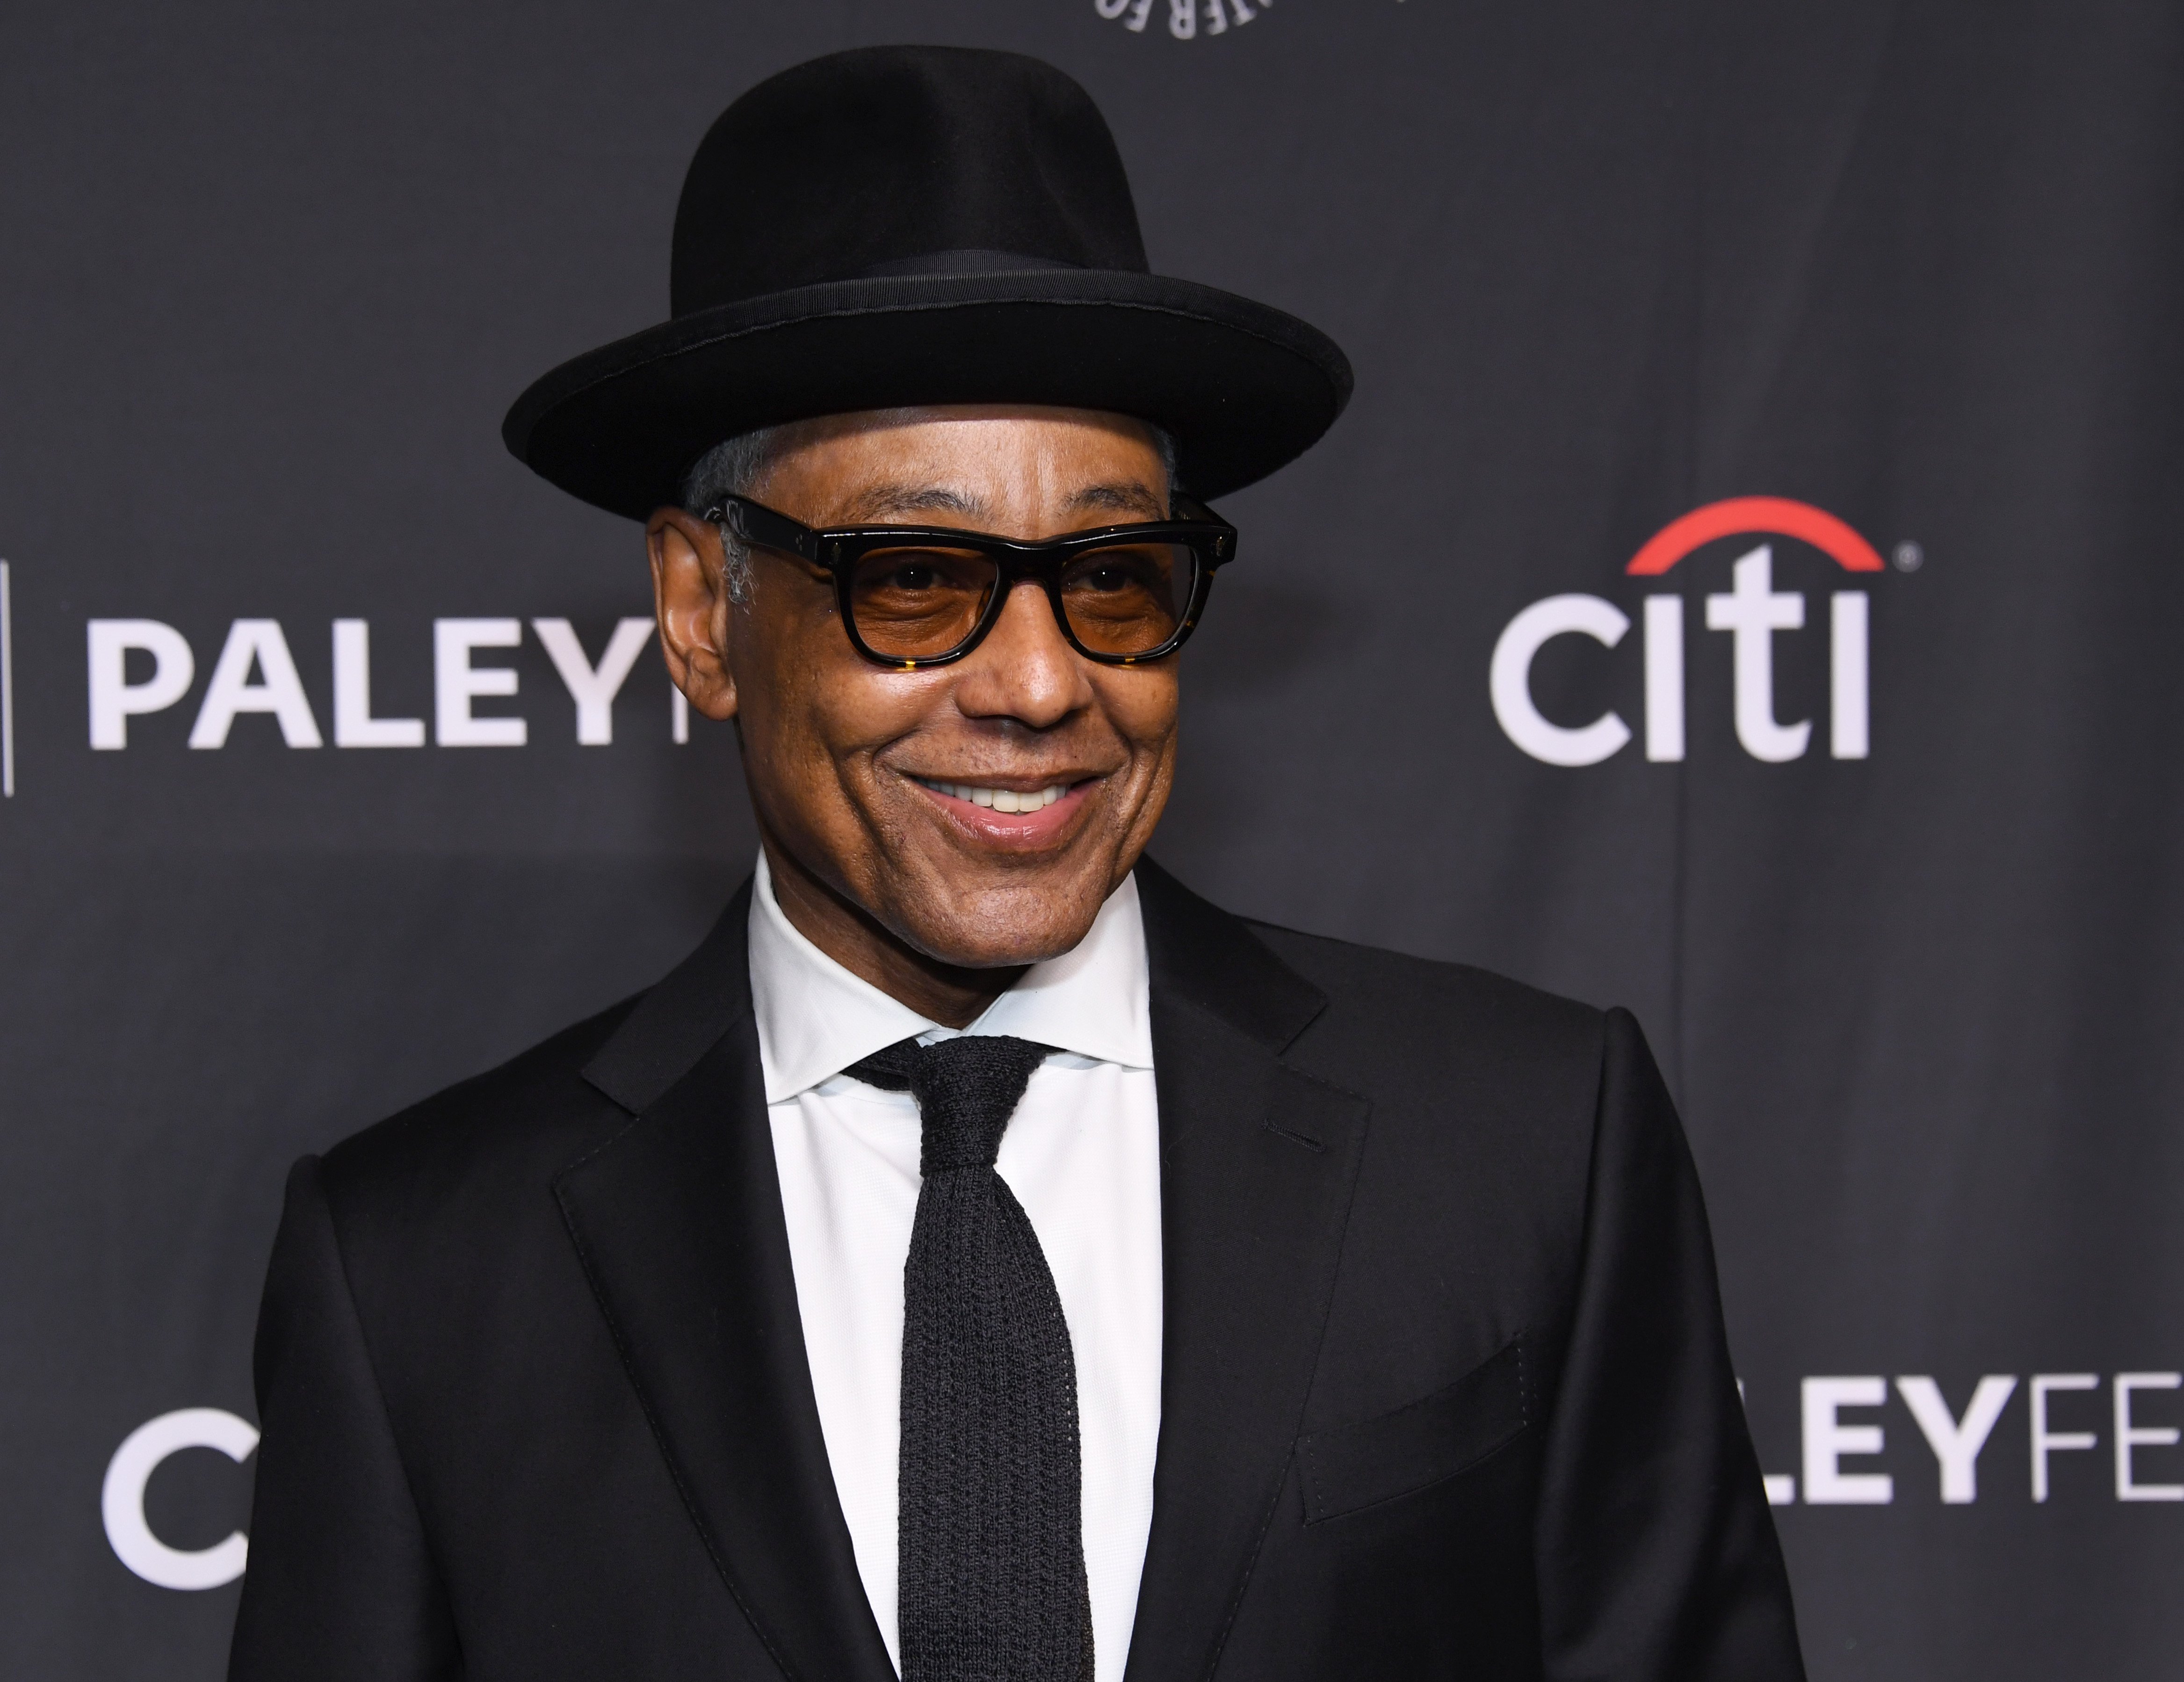 Giancarlo Esposito from Better Call Saul wearing a suit, black hat, and glasses. 